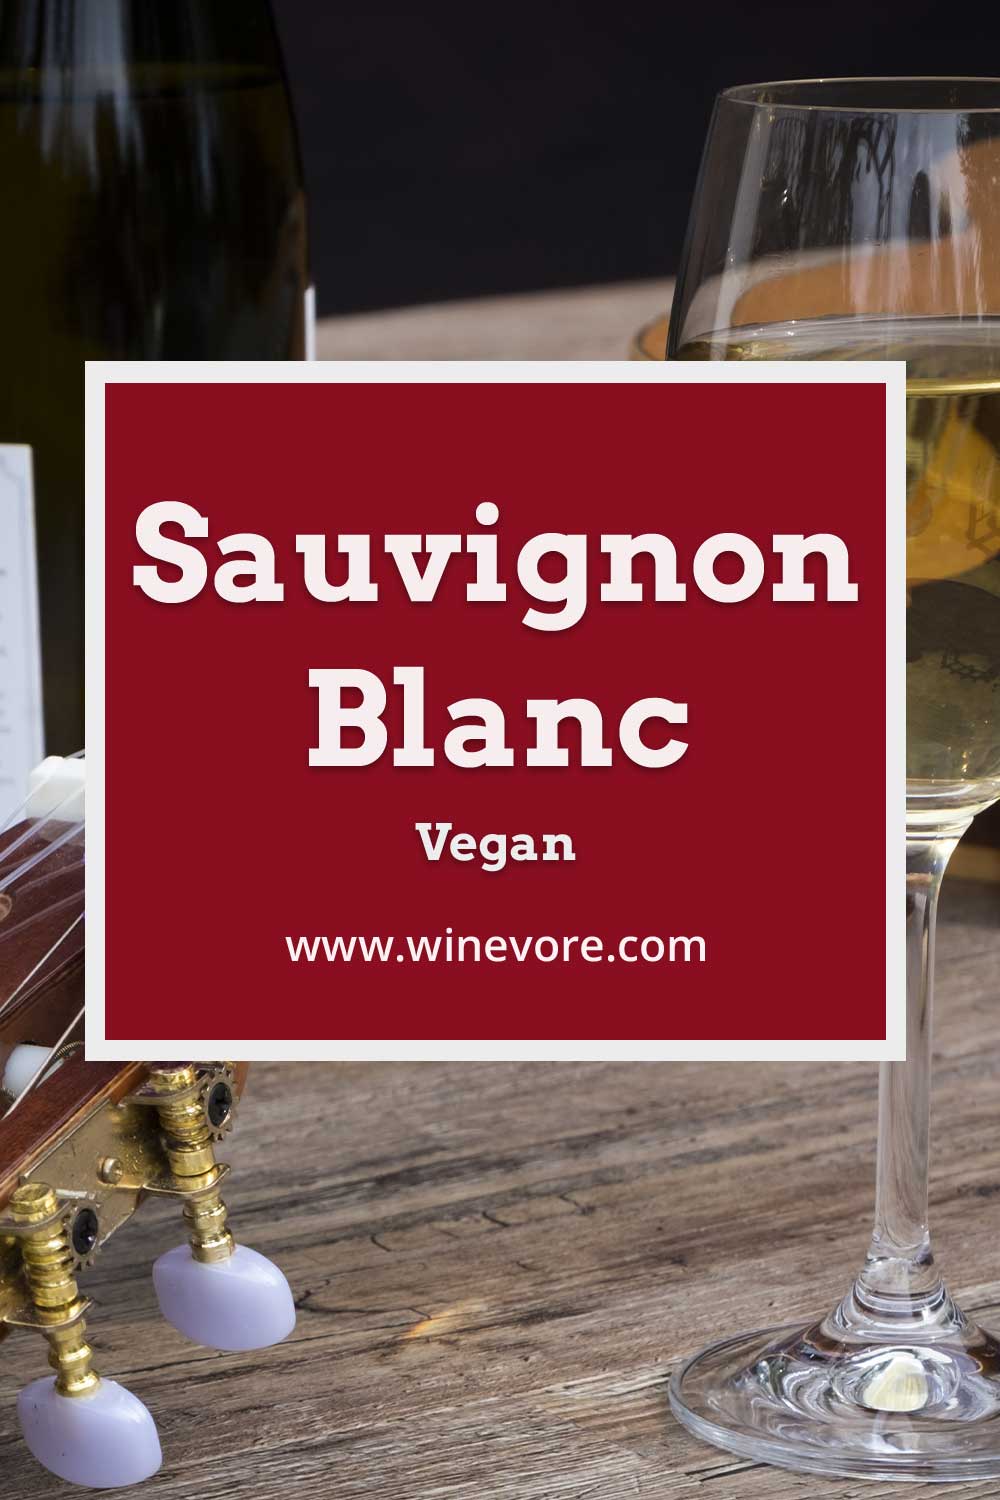 A glass of white wine put on a wooden surface,in front of a guitar and wine bottle - Sauvignon Blanc Vegan.